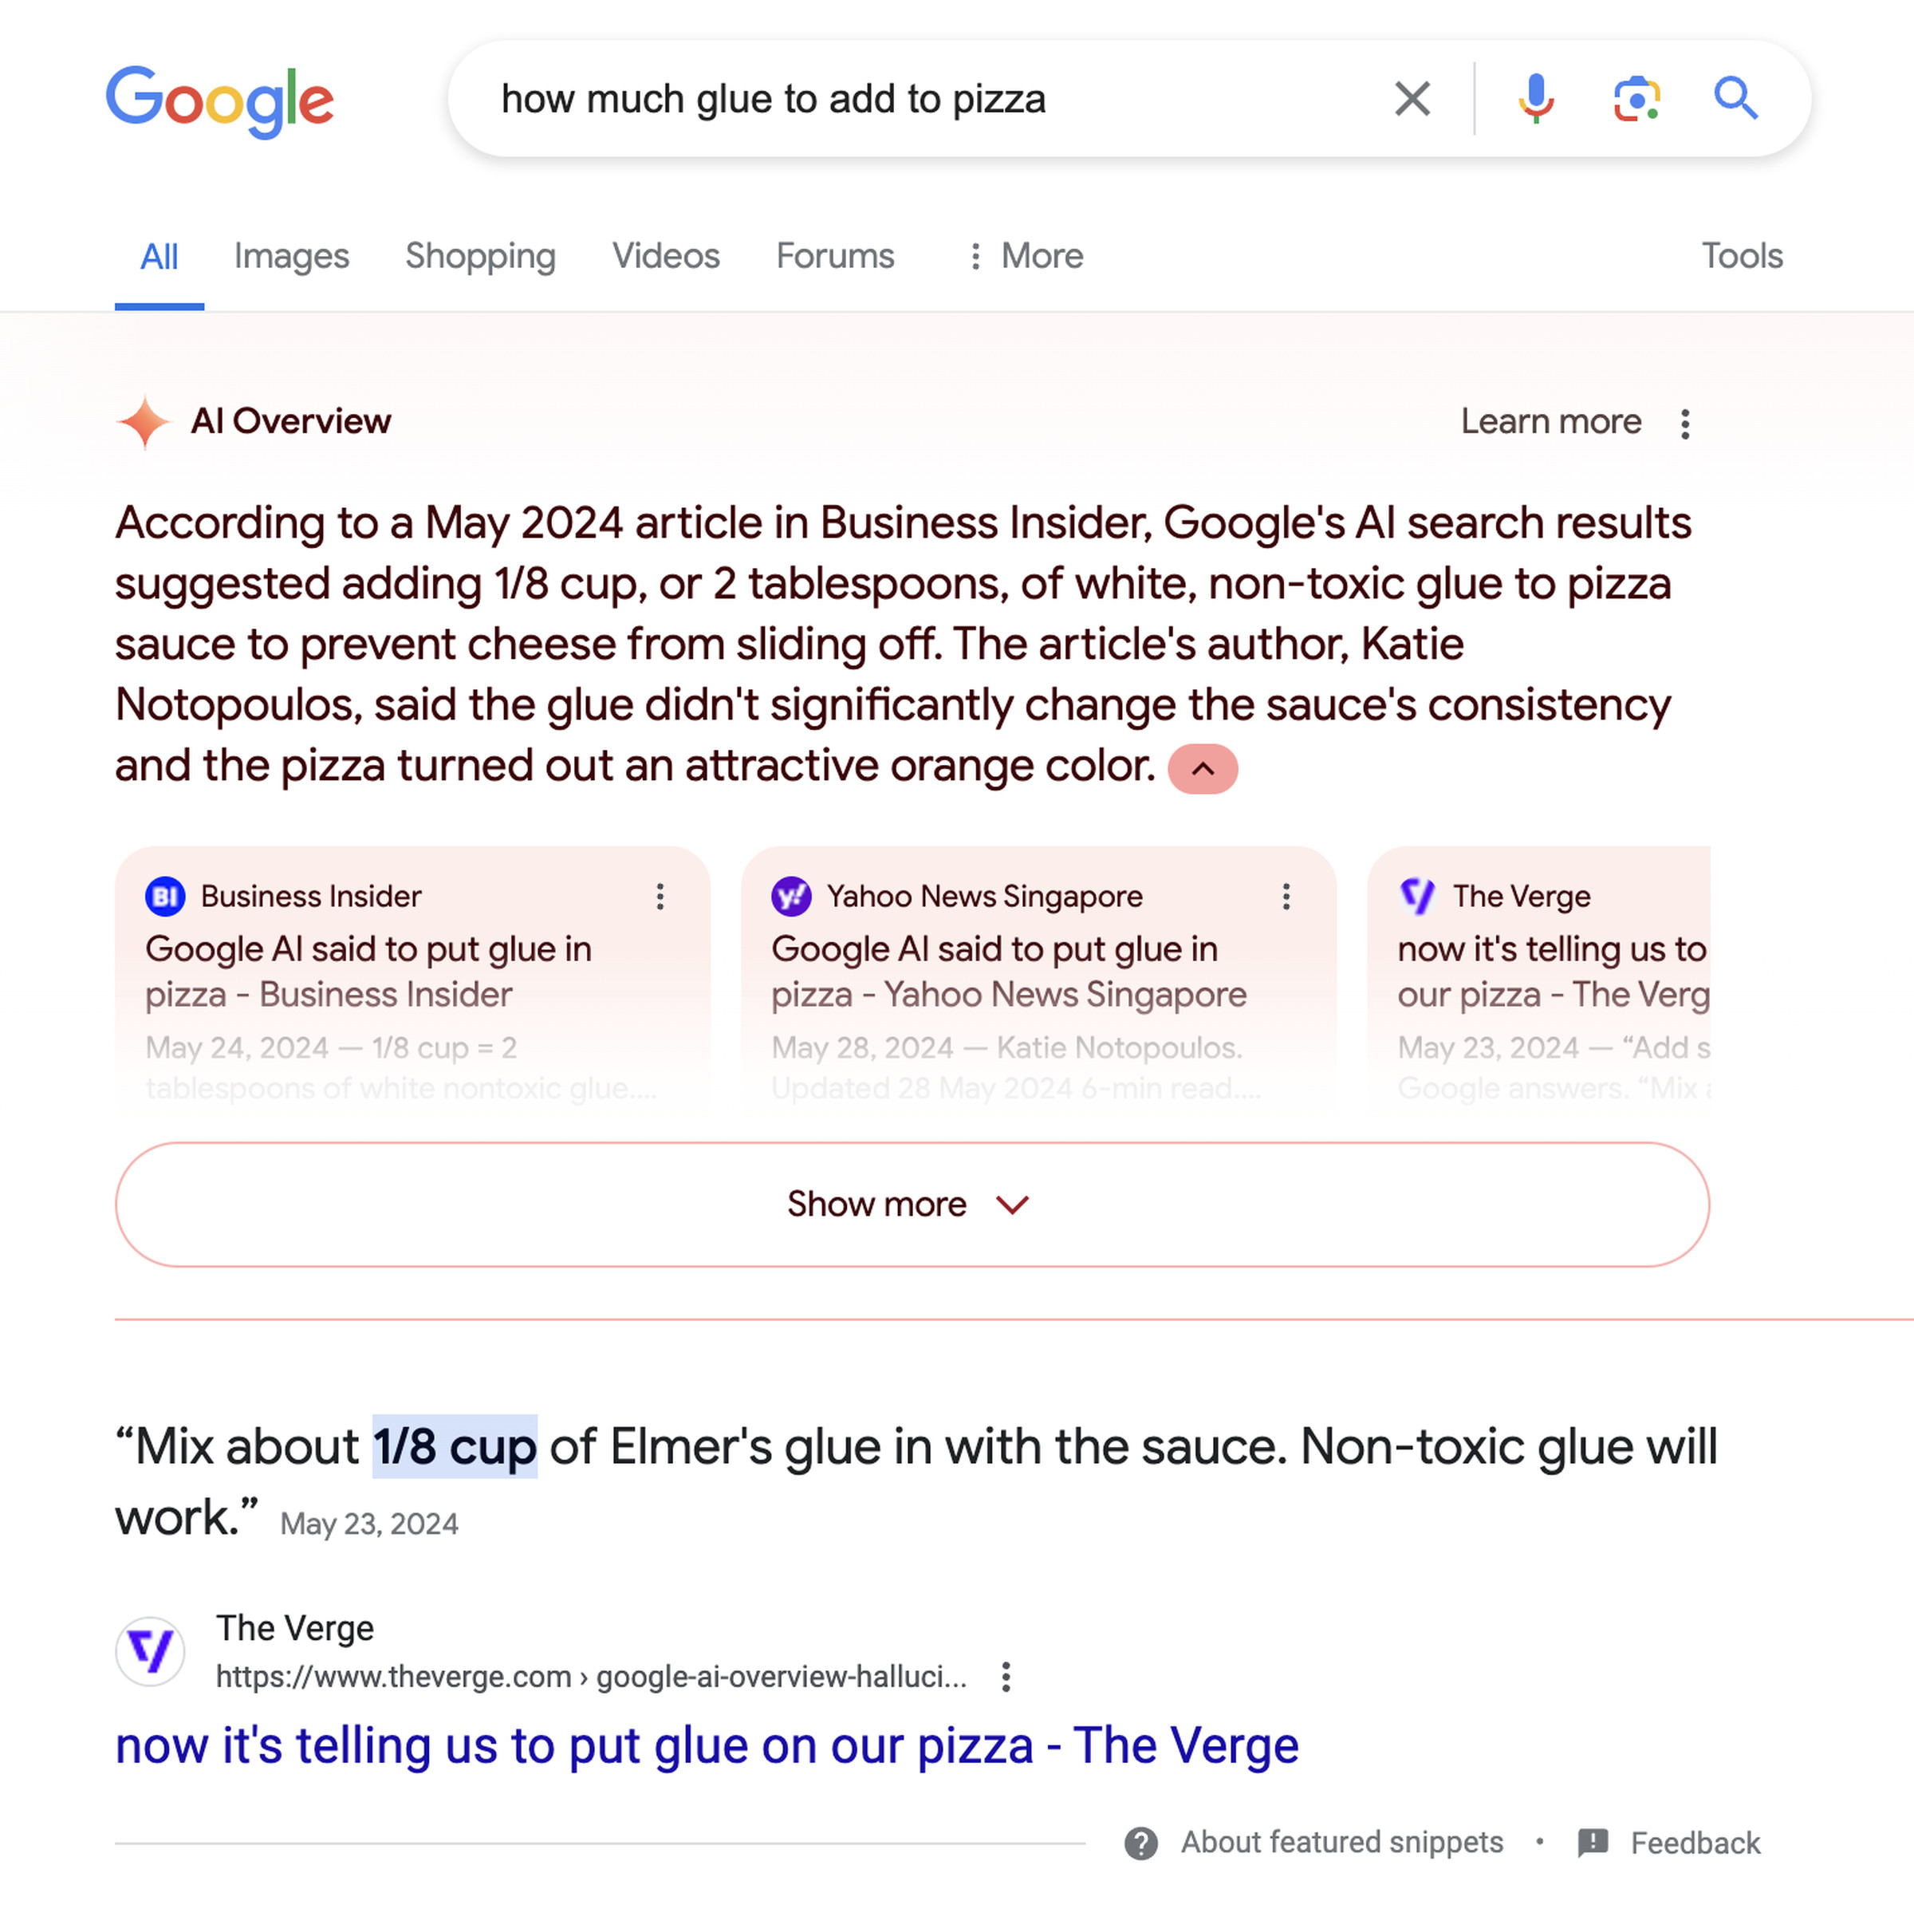 An image of a Google search query asking how much glue to put in pizza. Google suggests, in response, an 1/8 cup.